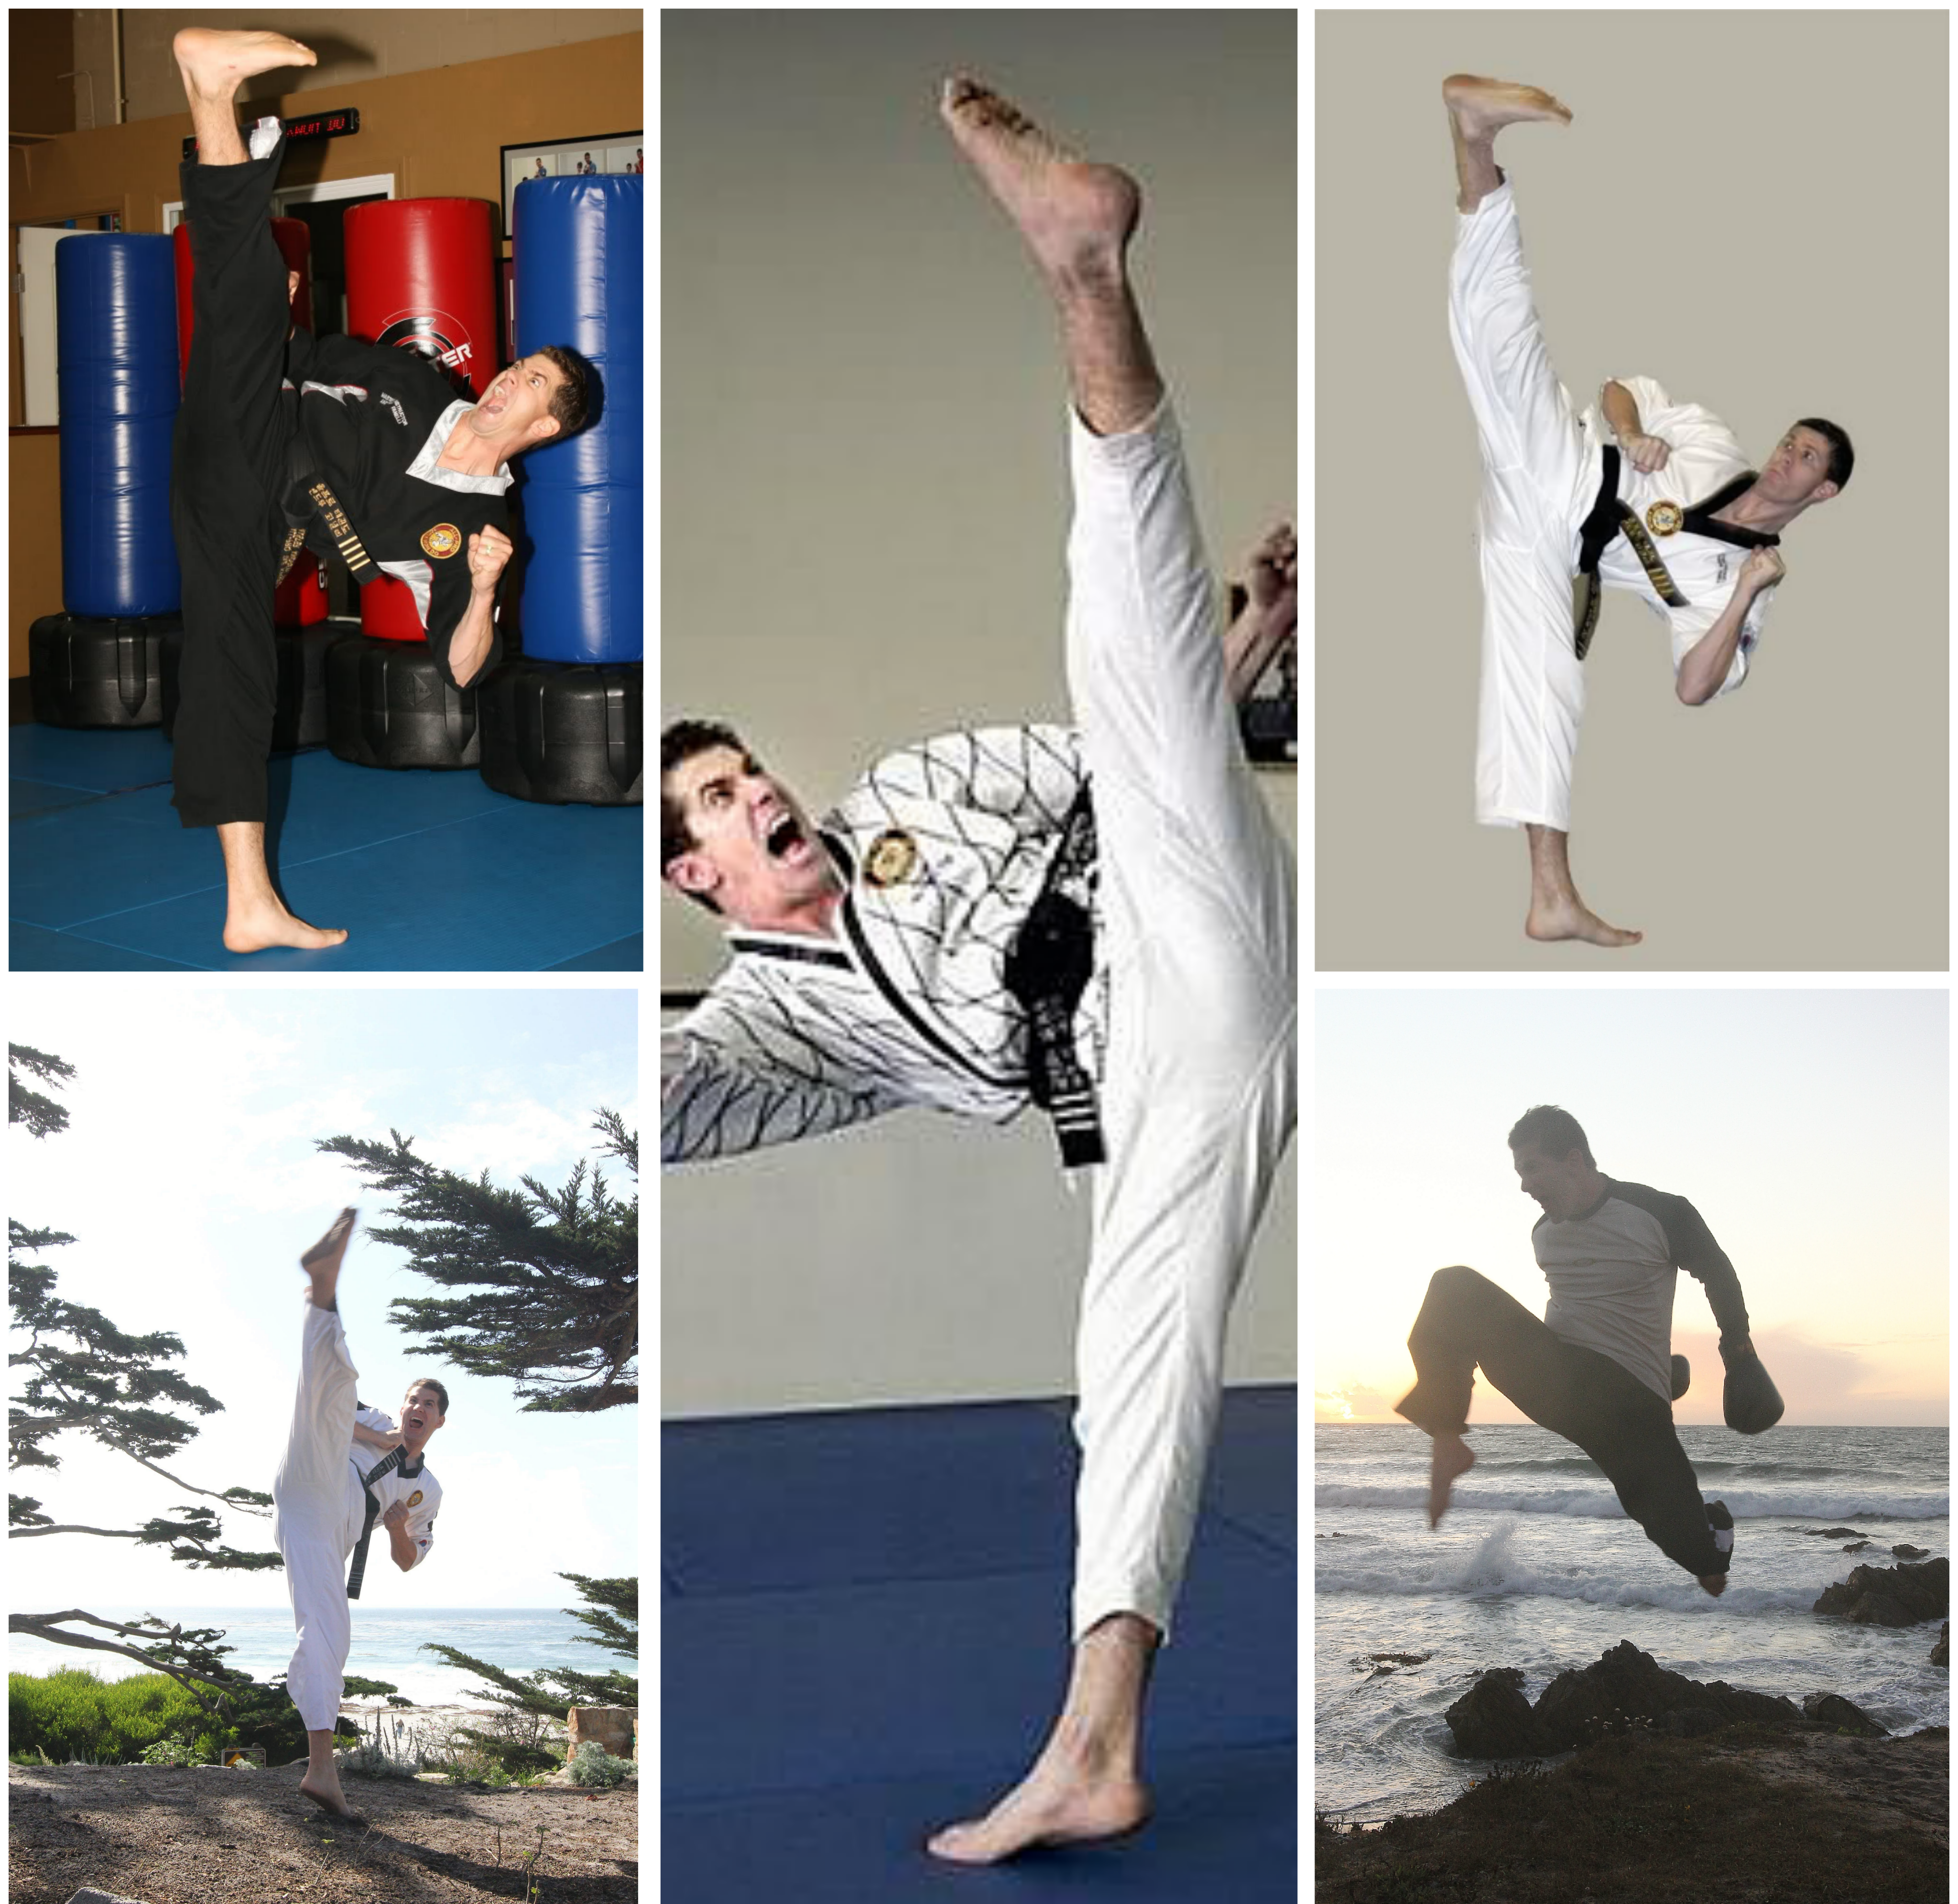 All-Pro Tae Kwon Do, Tuesday, January 18, 2022, Press release picture